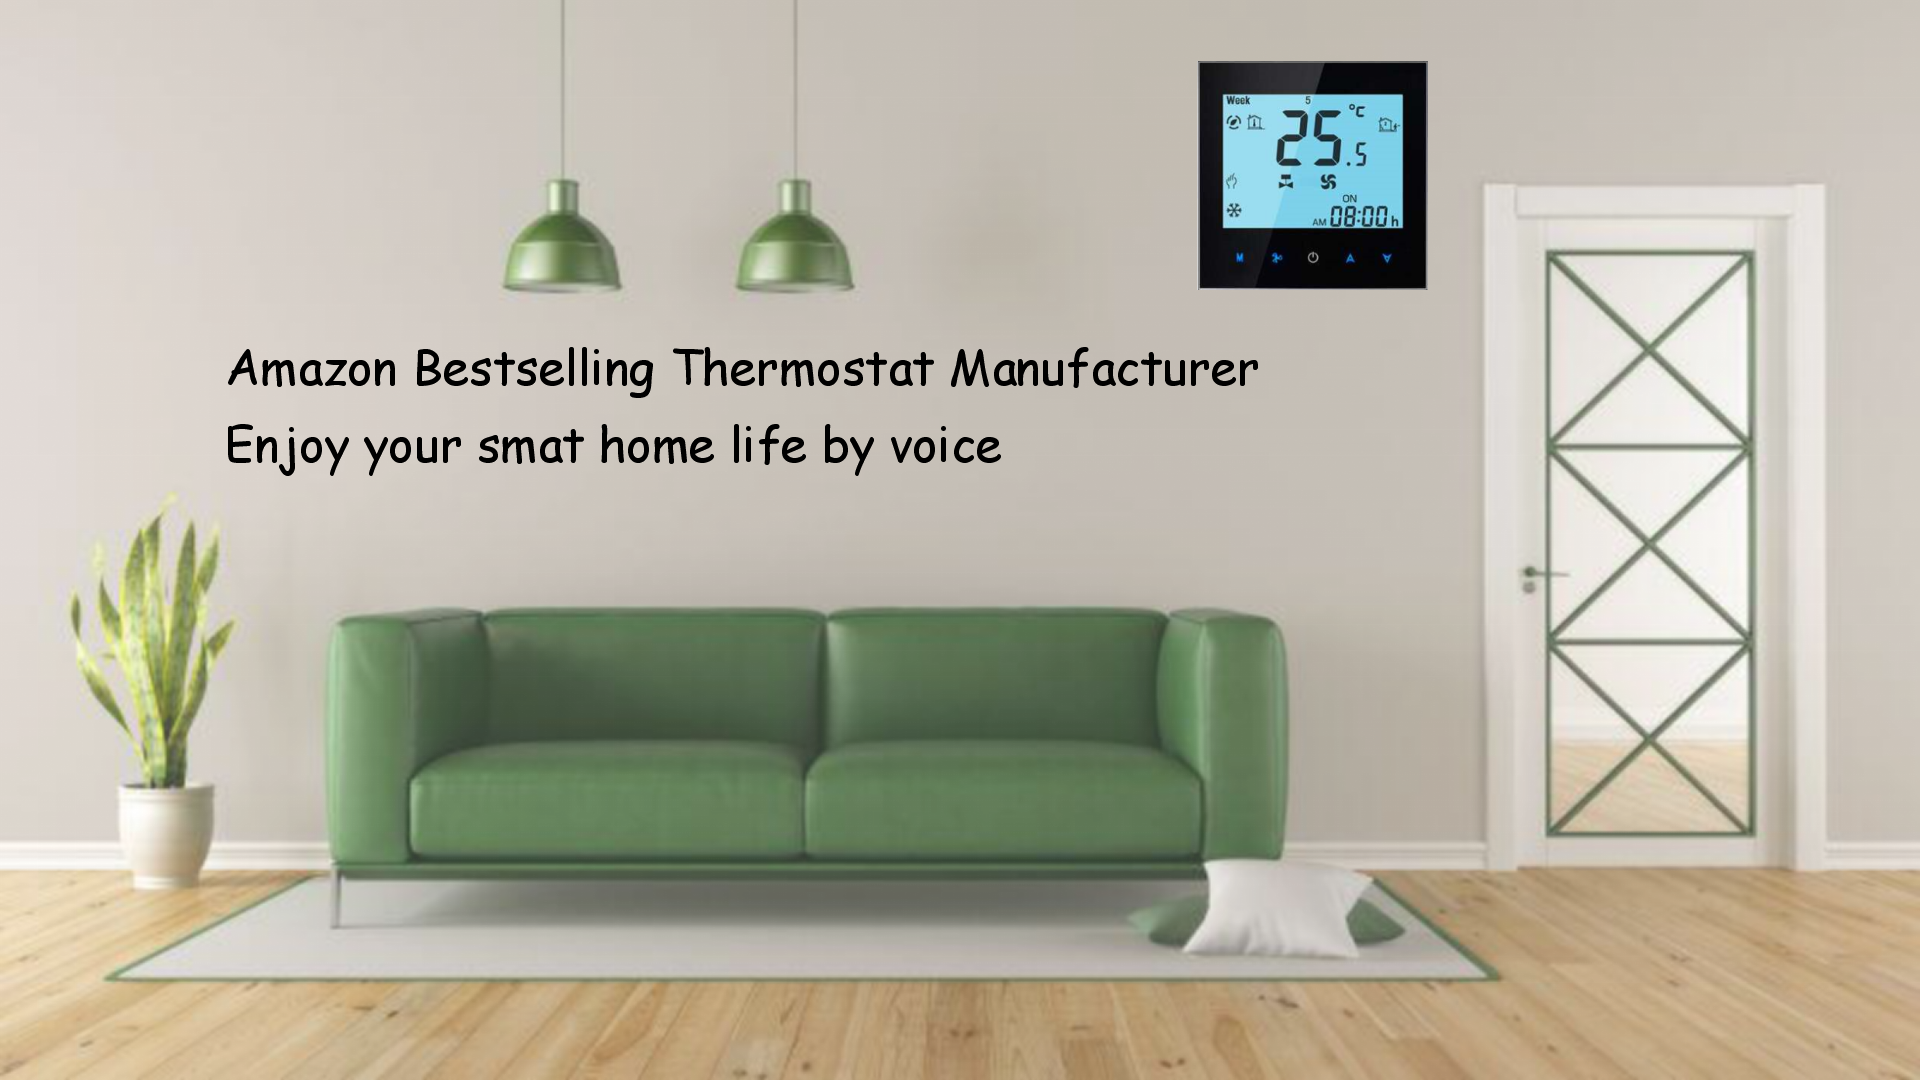 BECA BAC-1000 Two Pipe Four Pipe Zwave Fan Coil Programmable Room Thermostat-Xiamen Beca Energysaving Technology